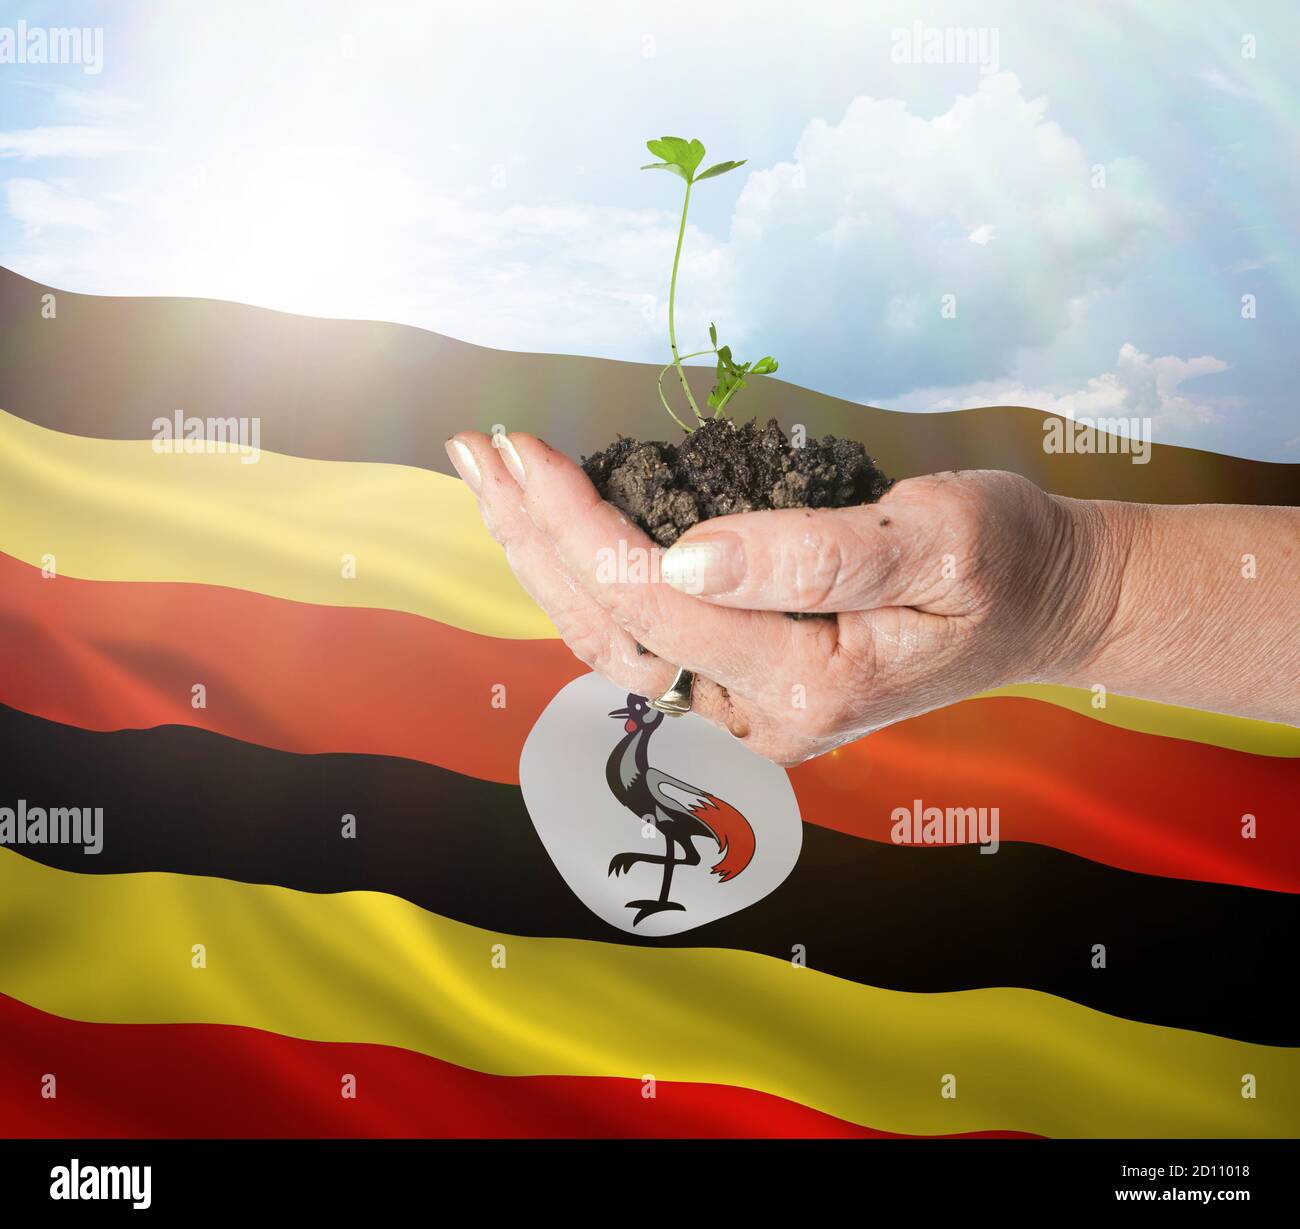 Uganda growth and new beginning. Green renewable energy and ecology concept. Hand holding young plant. Stock Photo